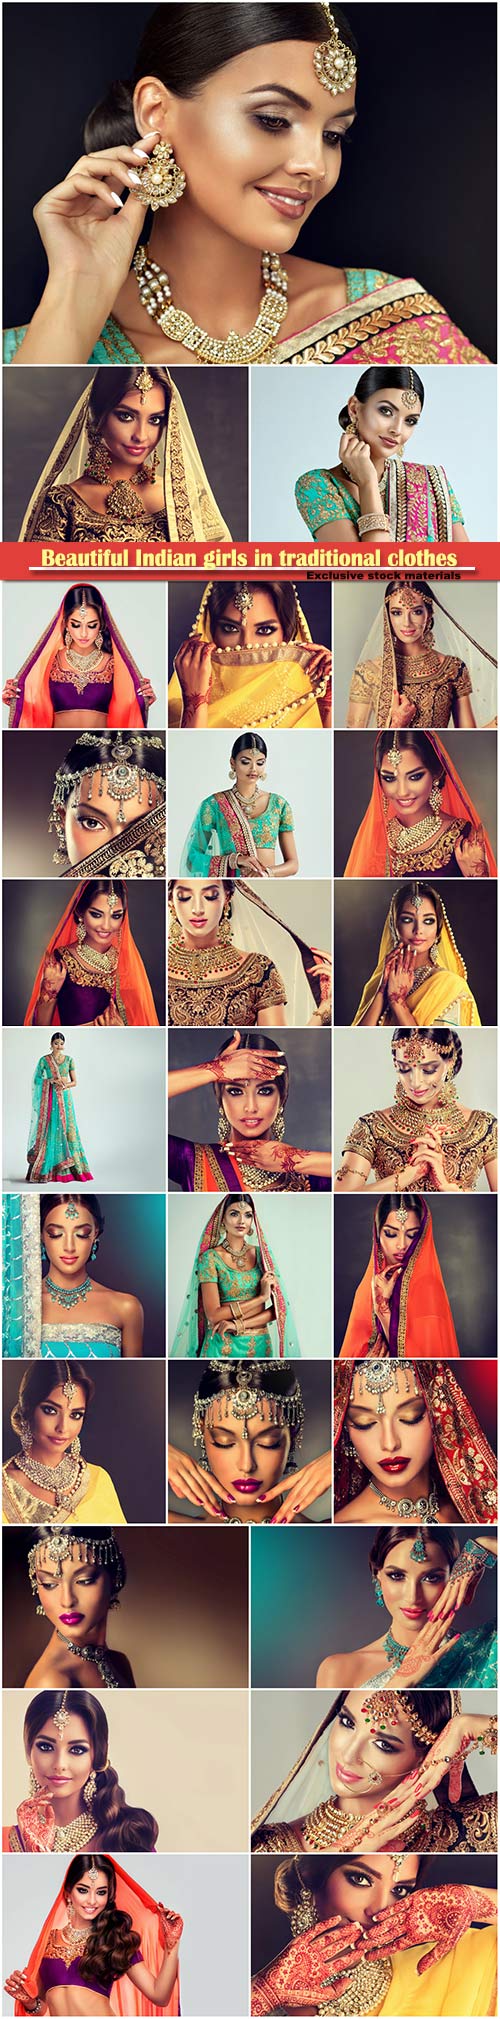 Beautiful Indian girls in traditional clothes, beautiful make-up, women wit ...